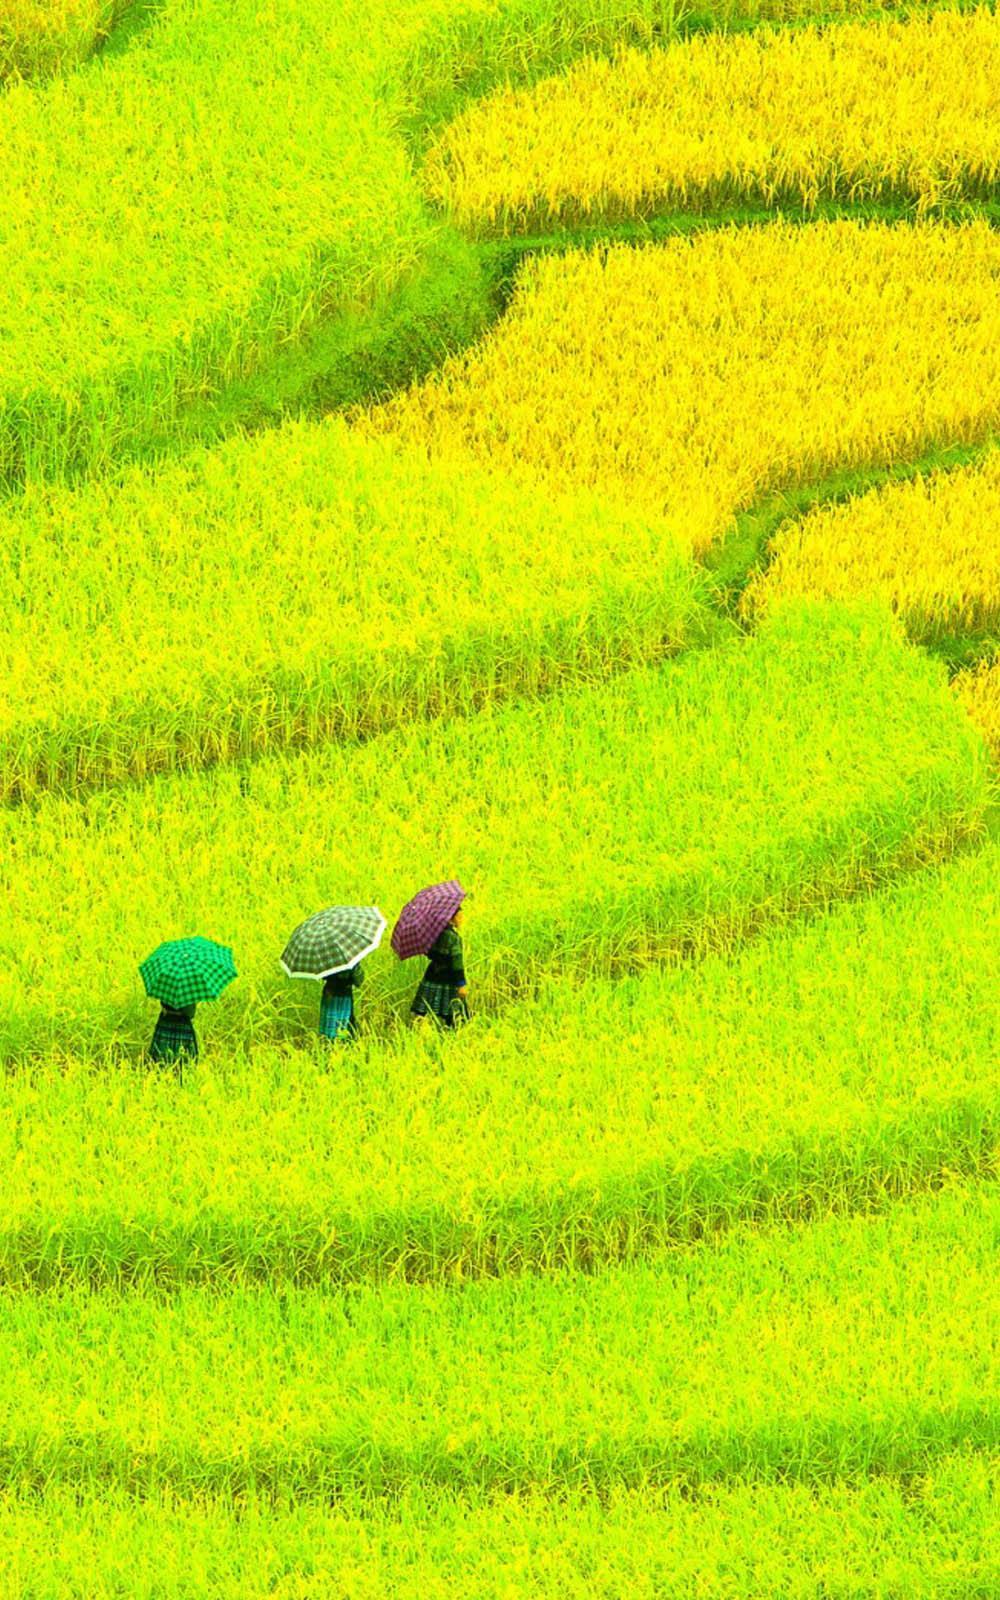 Download Awesome Asian Paddy Field Free Pure 4K Ultra HD